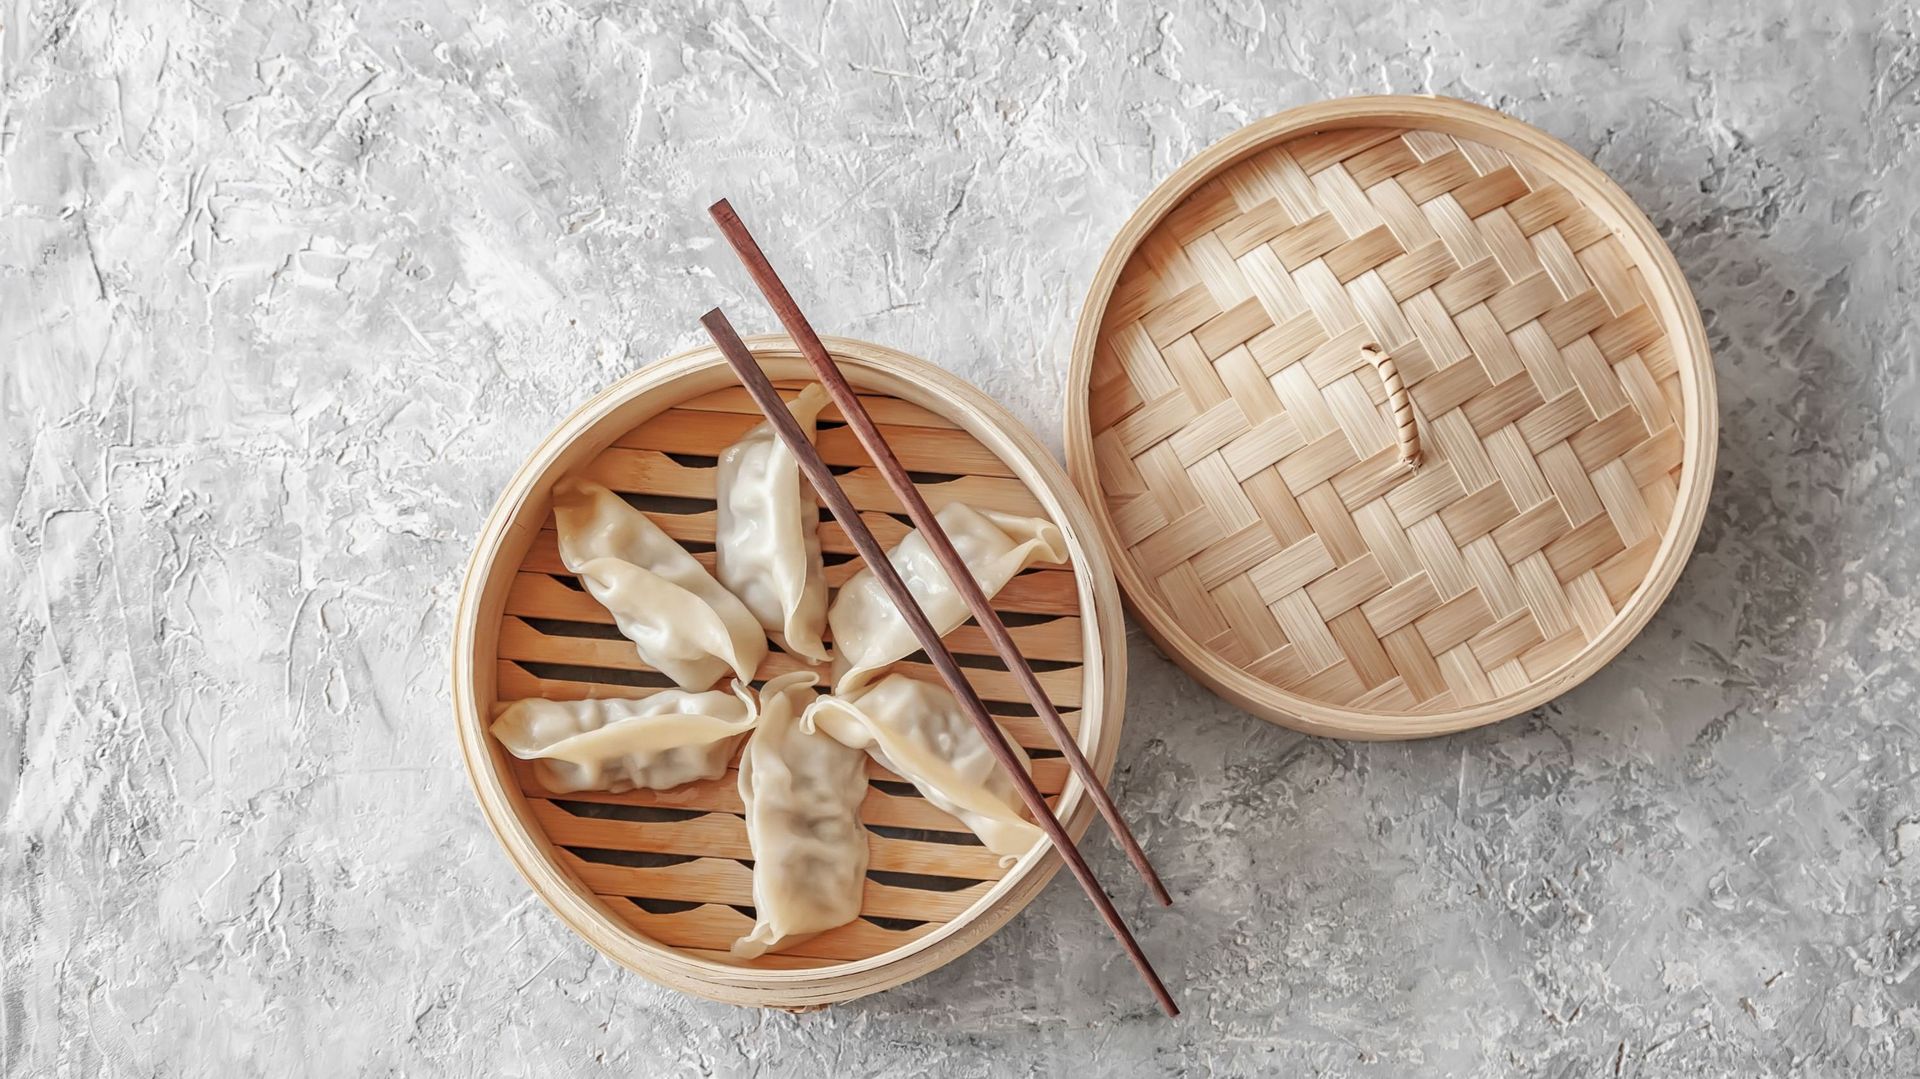 Steamed Chinese dumplings (Jiaozi) on bamboo steamer and chopsticks, concrete background, top view